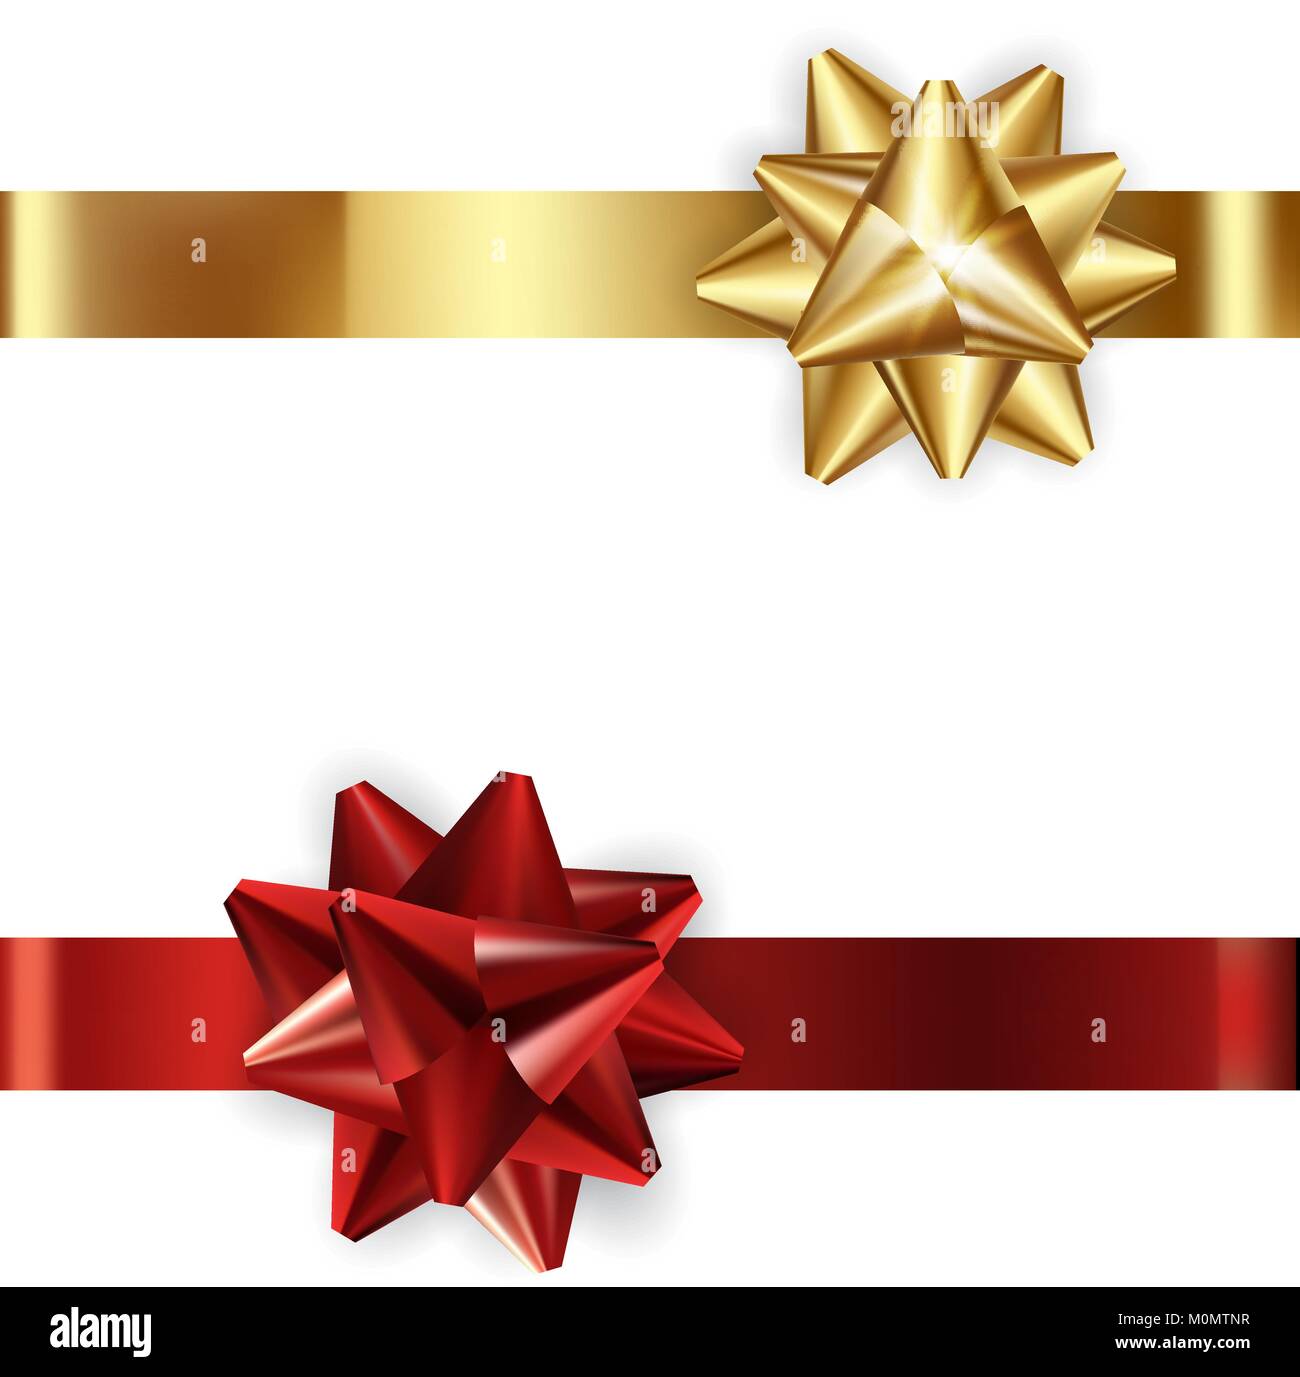 Set of decorative golden and red bows with horizontal ribbons isolated on white. Stock Vector